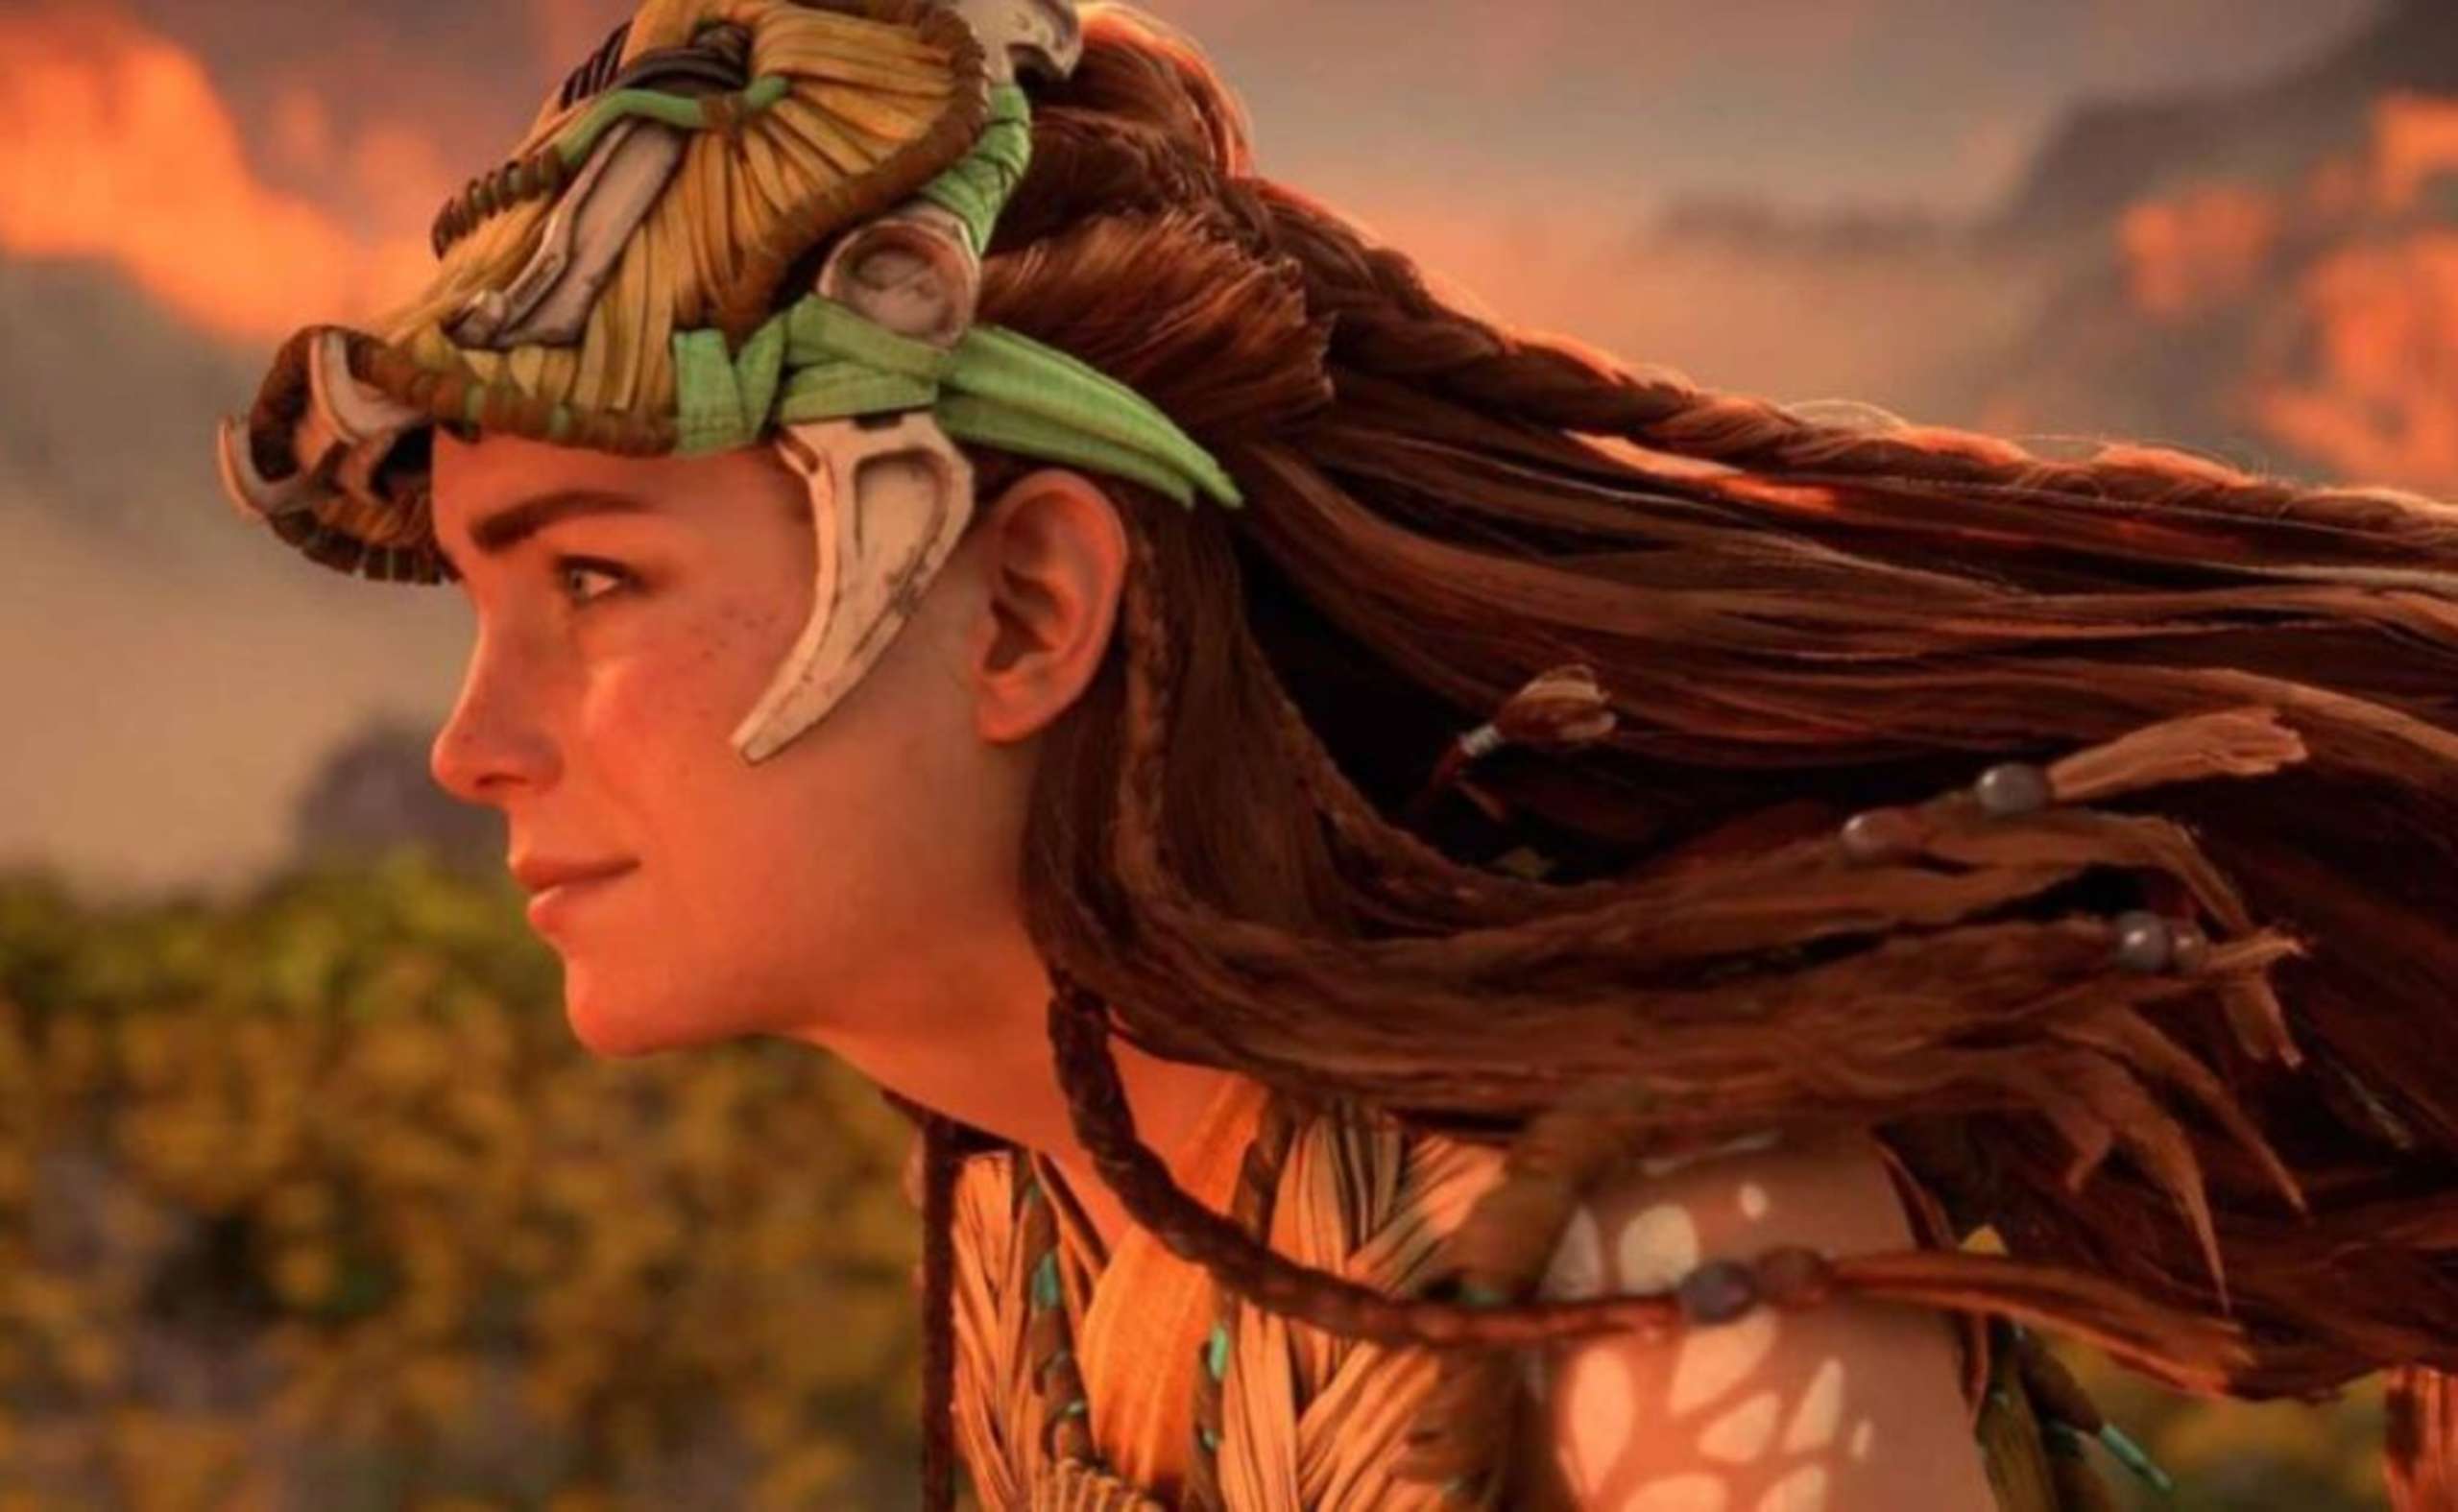 Inaccessible Horizon Forbidden West As Rumours Of A Zero Dawn Remake Circulate Over The Internet, West Developer Guerilla Games Shows An Excellent Aloy Cosplay